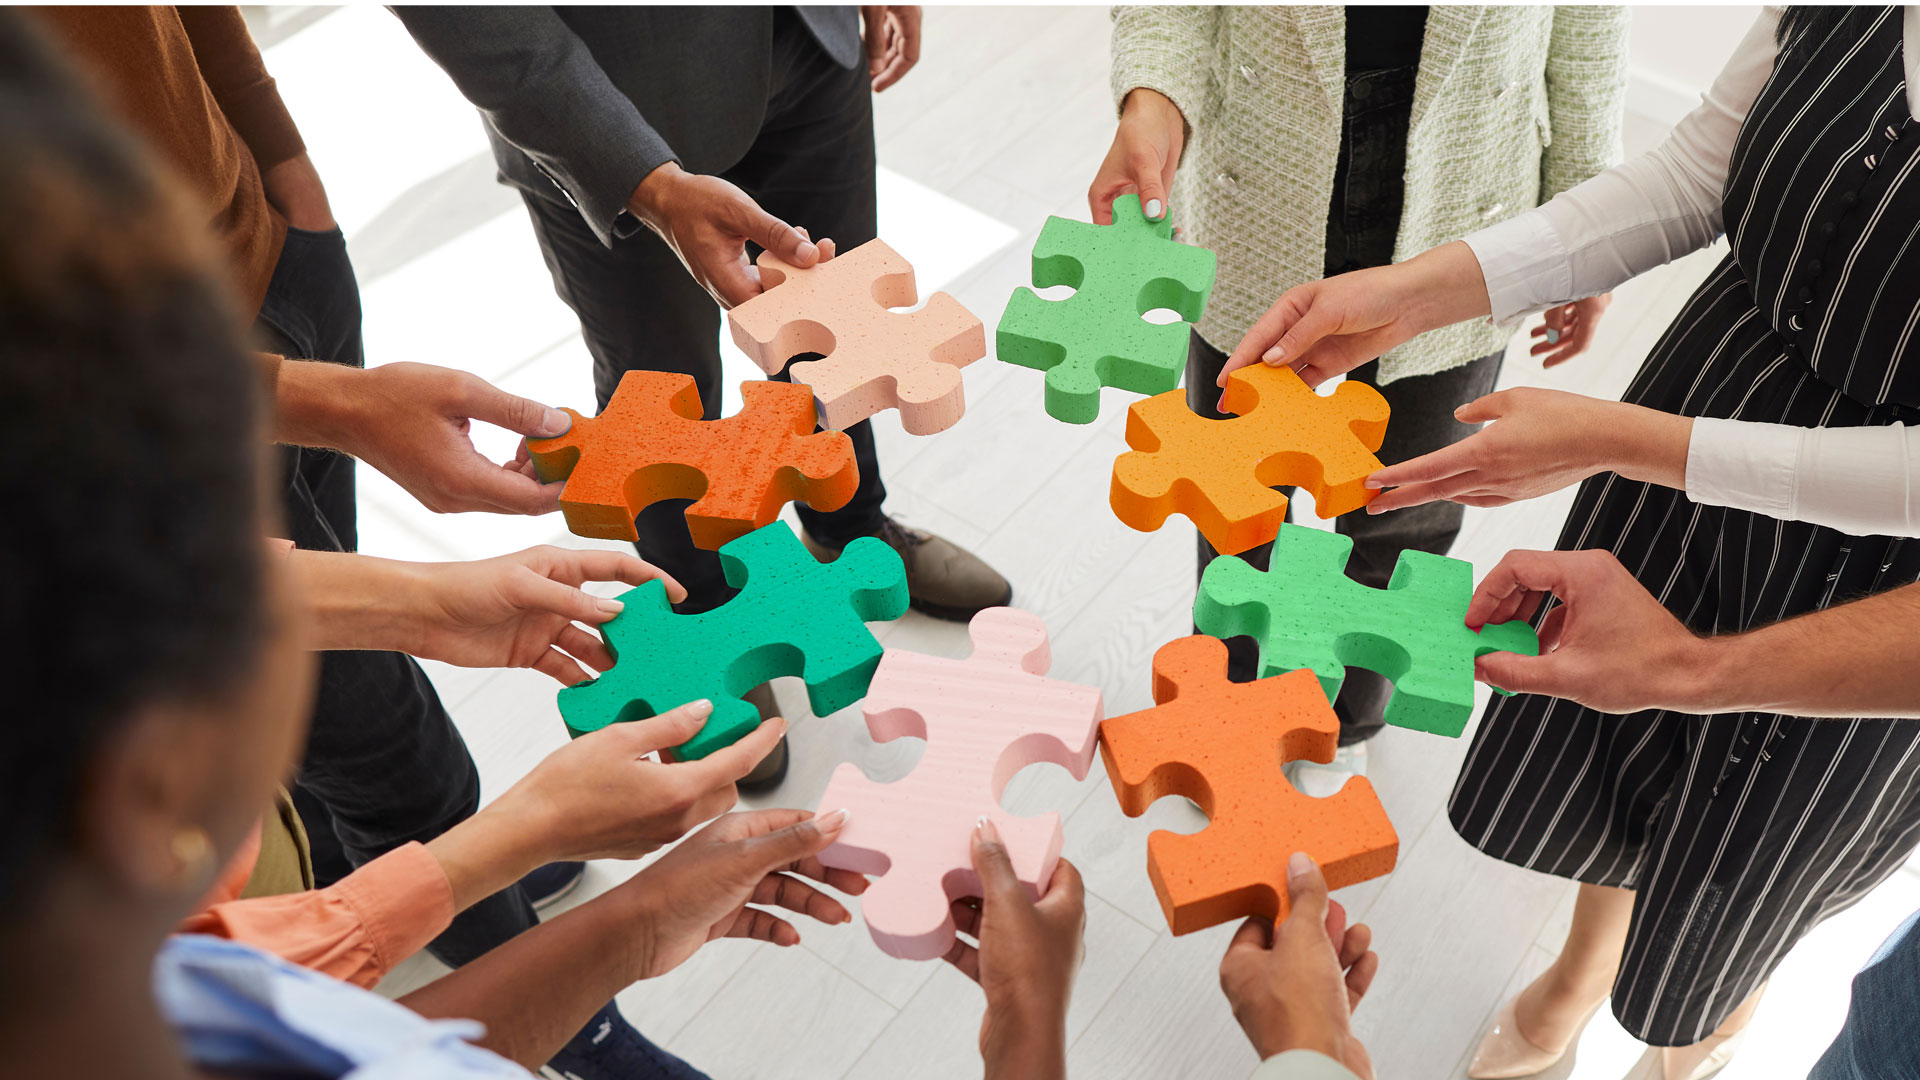 HR works holding green and orange puzzle pieces